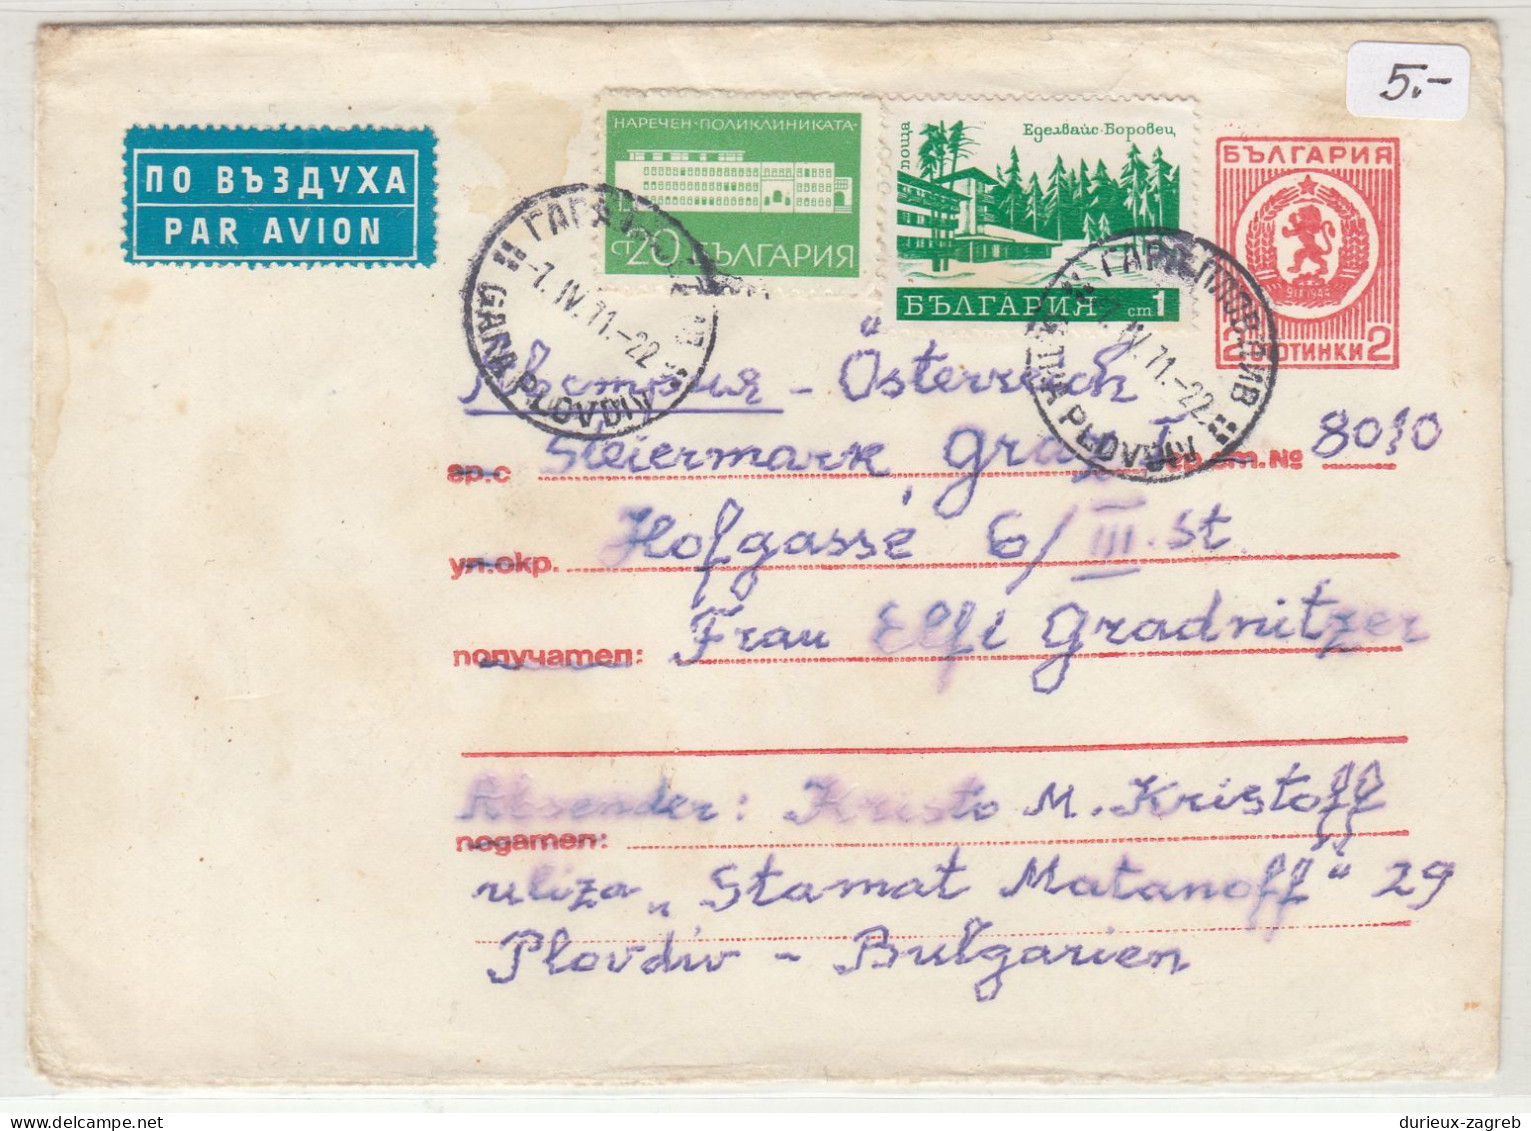 Bulgaria Postal Stationery Letter Cover Posted Air Mail 1971 Plovdiv To Graz - Uprated B240401 - Buste